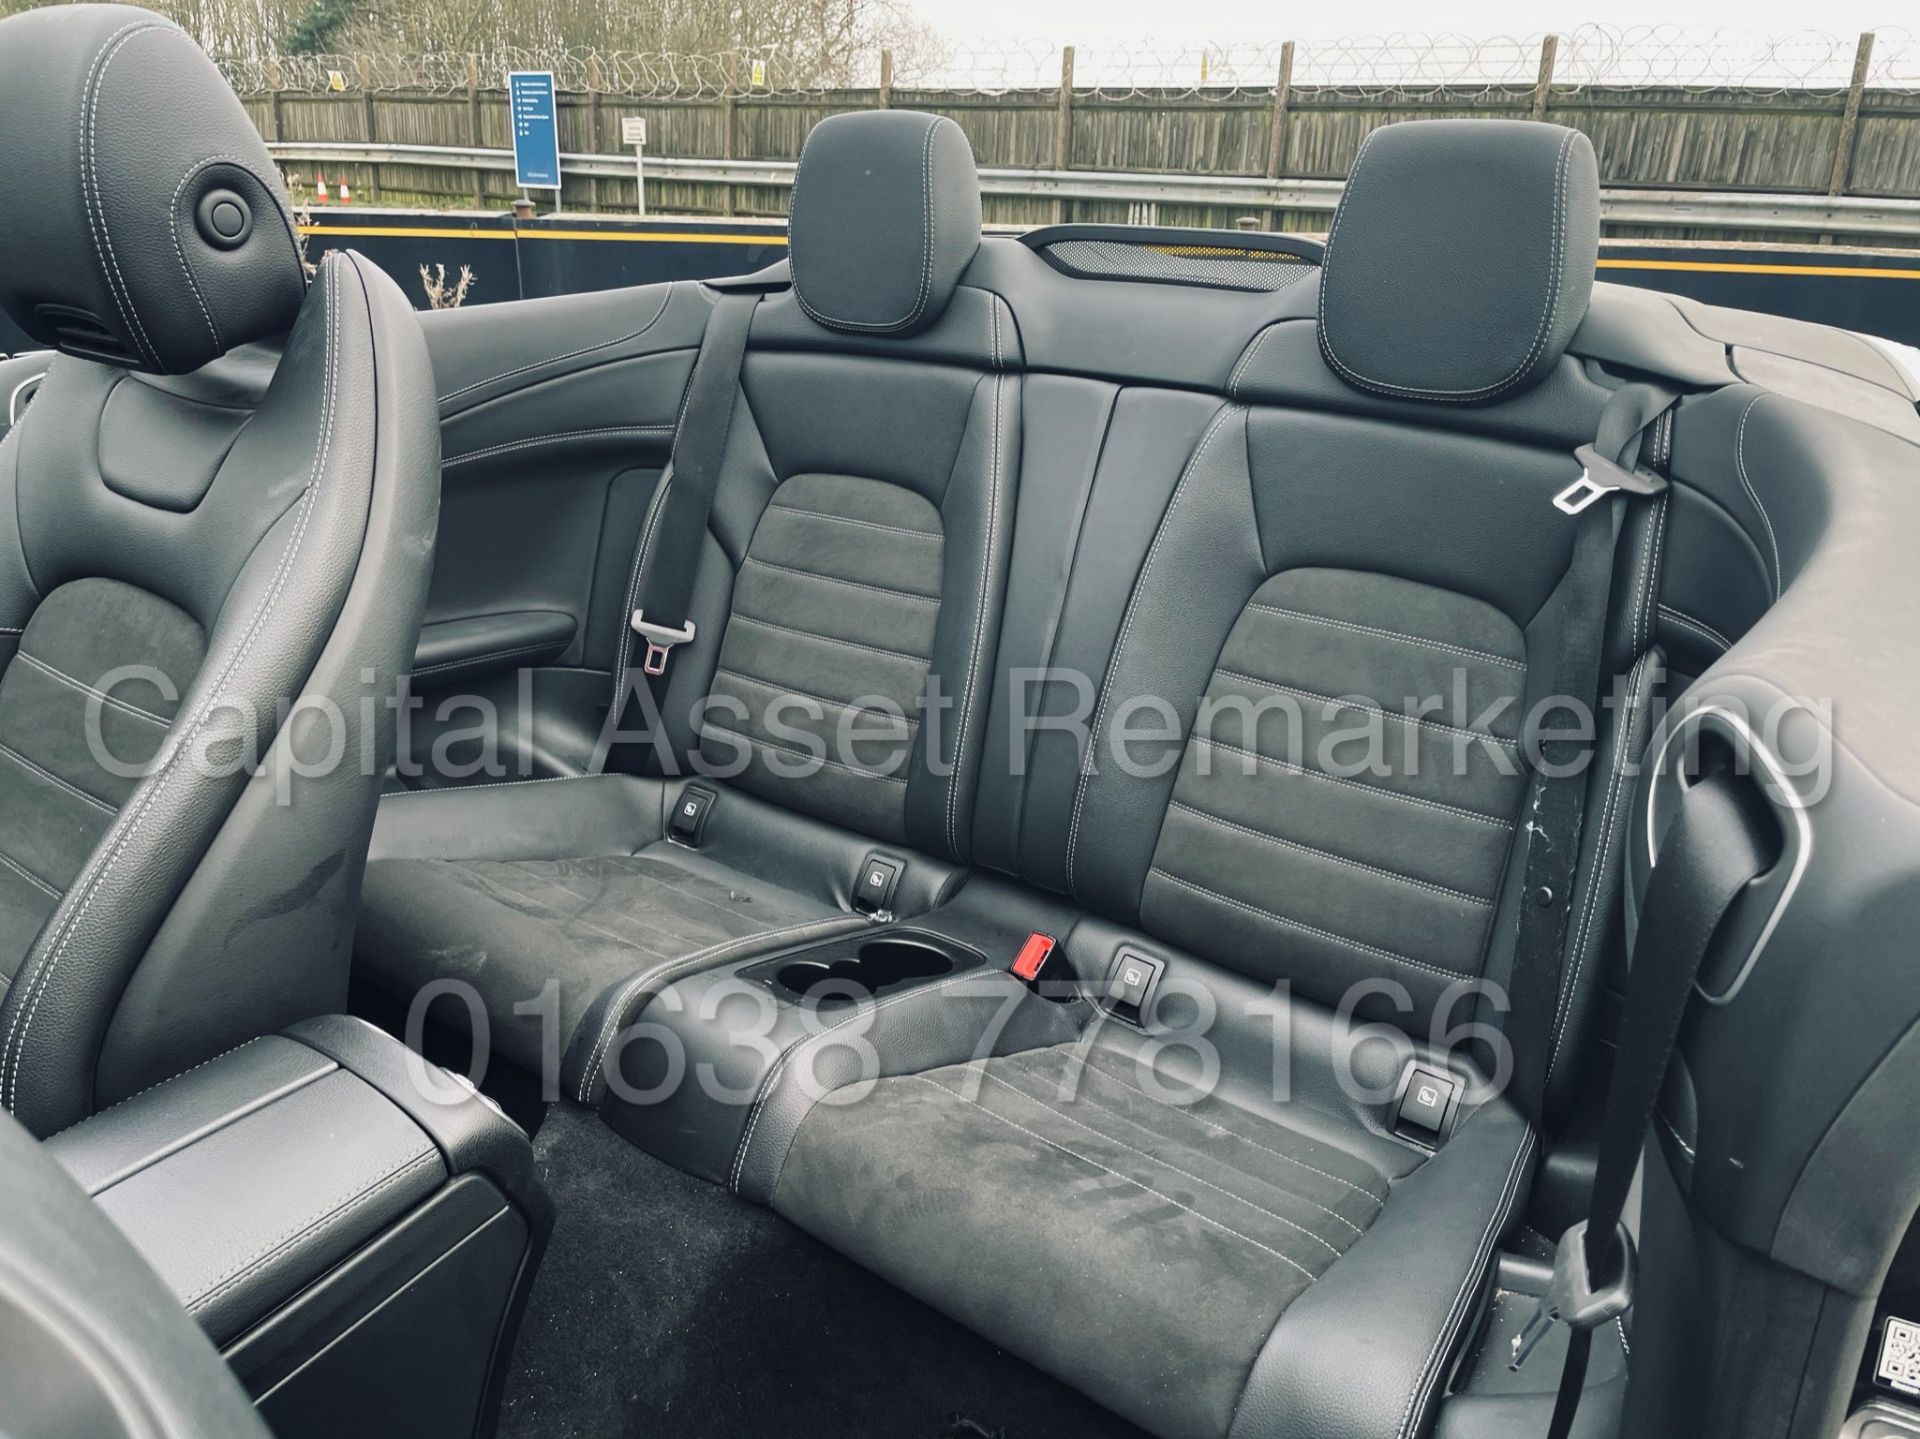 (ON SALE) MERCEDES-BENZ C220D *AMG LINE - CABRIOLET* (2019) '9G TRONIC AUTO - LEATHER - SAT NAV' - Image 37 of 56